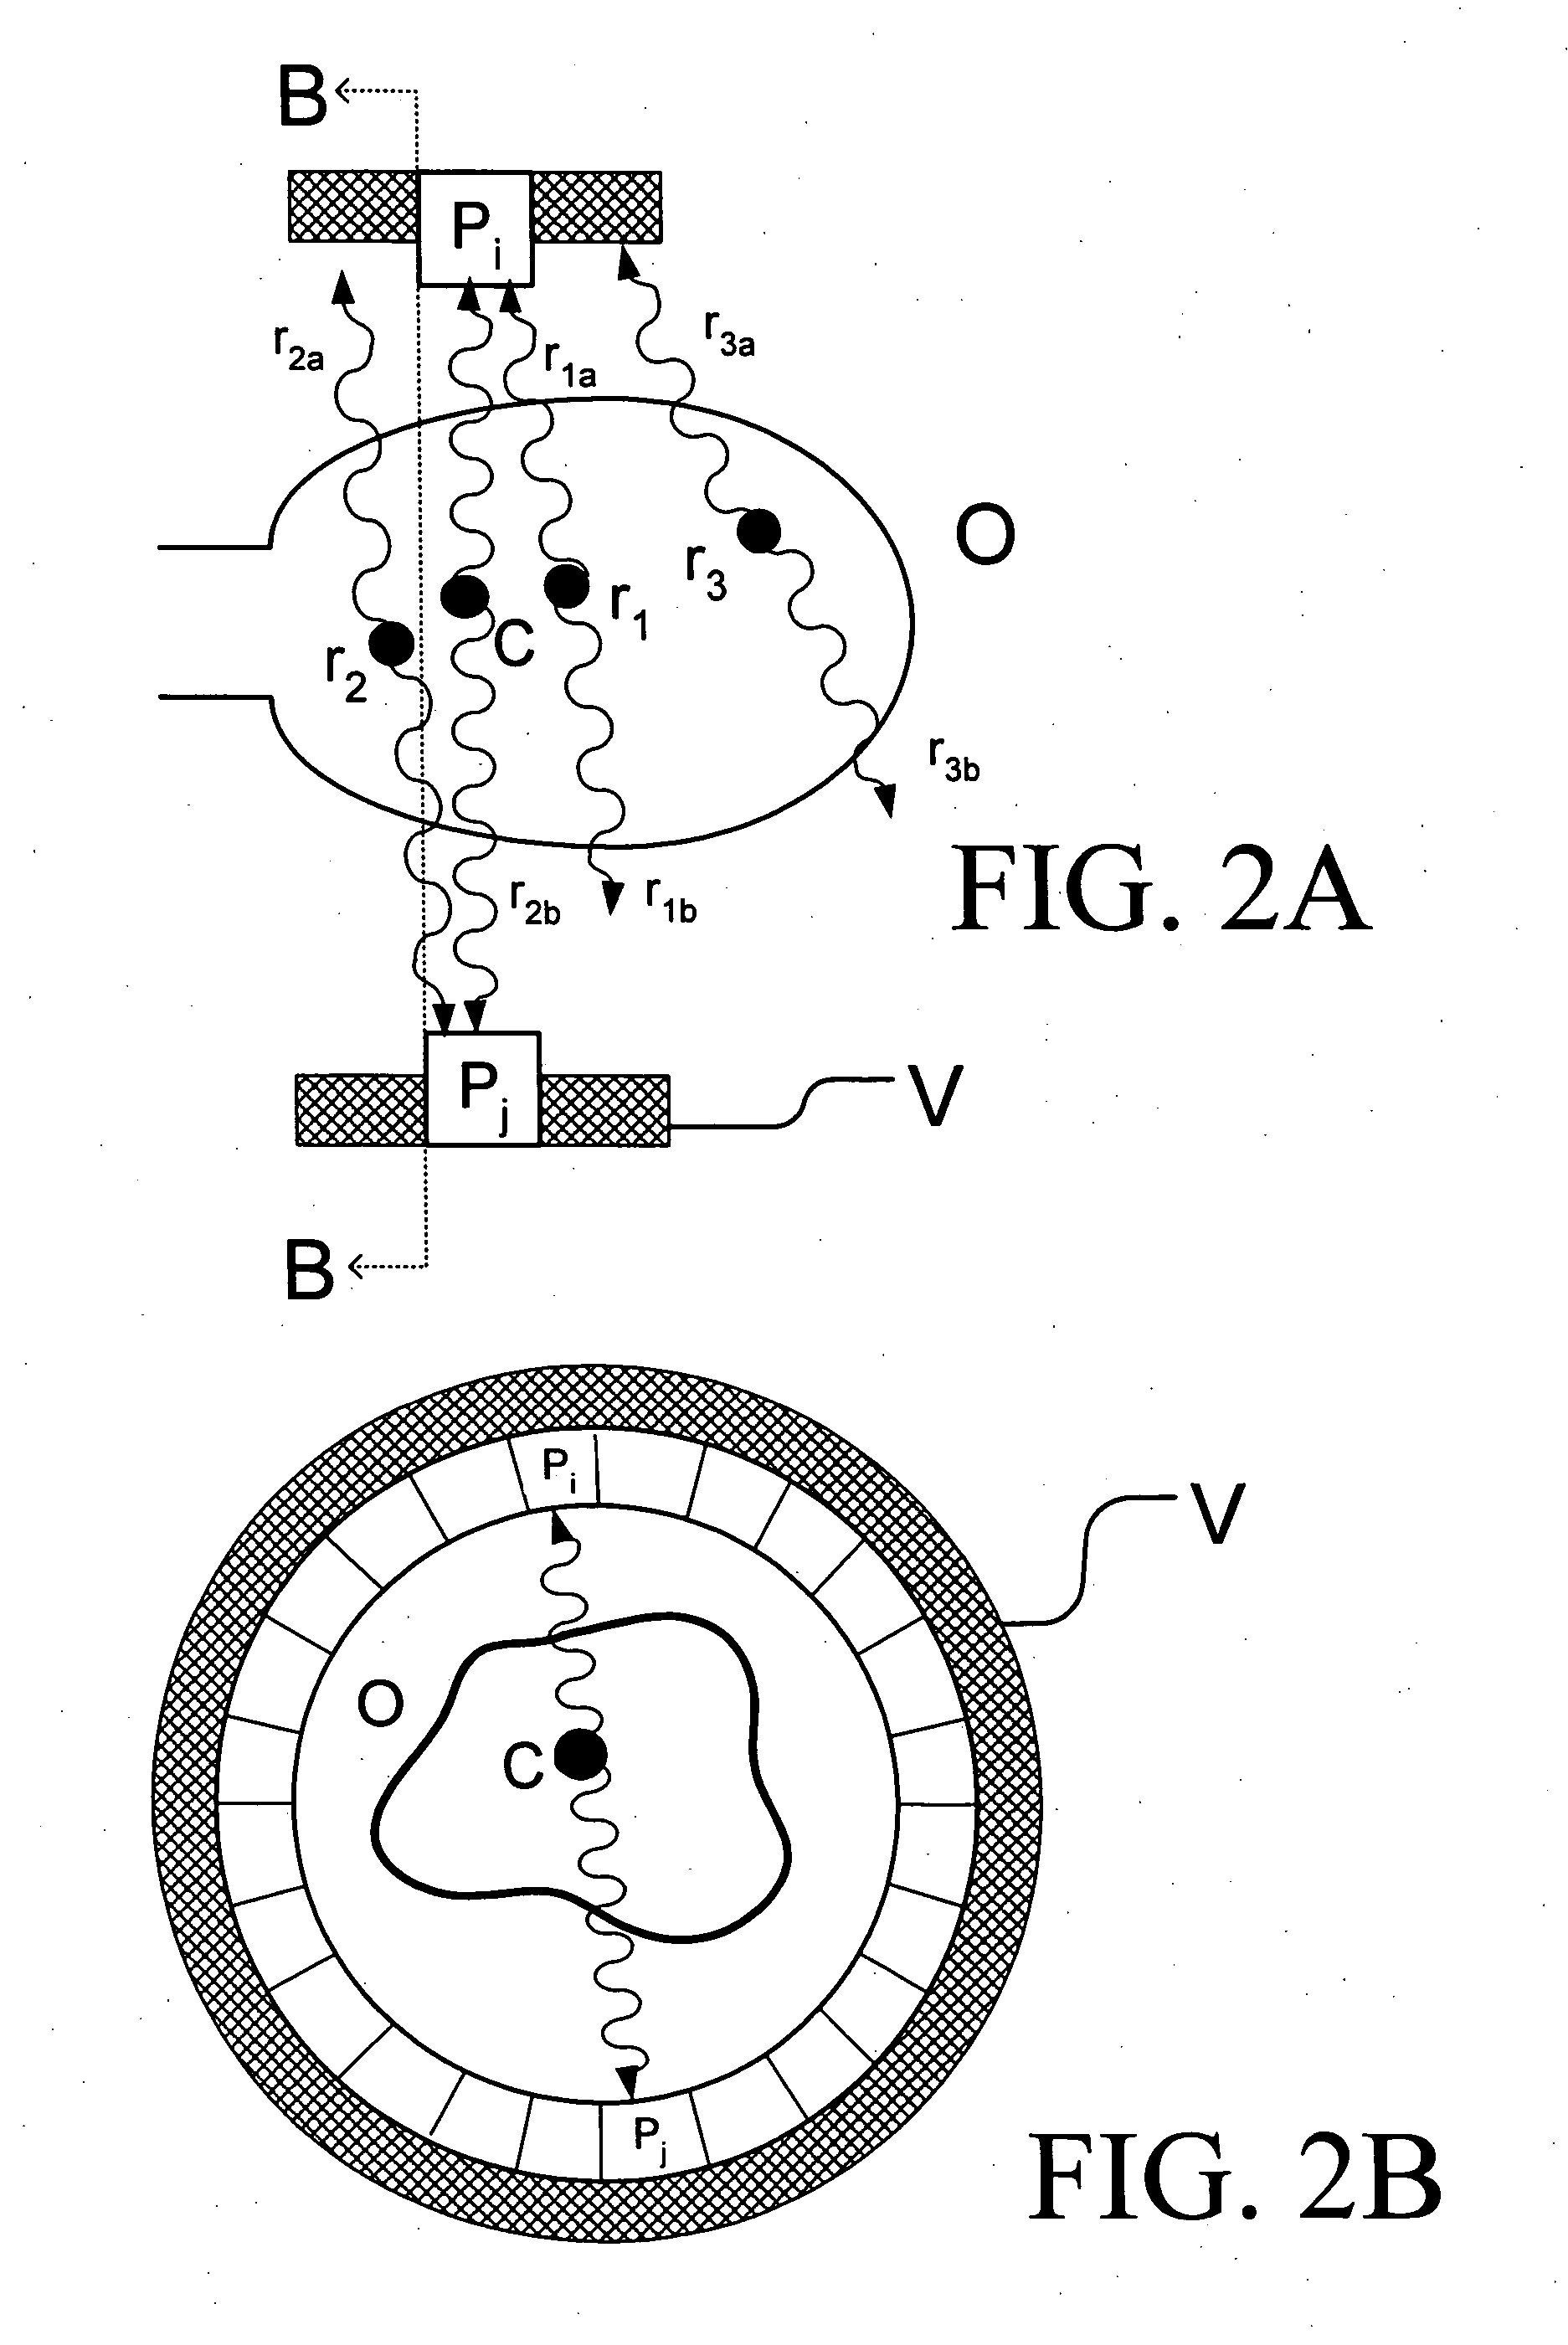 Method and apparatus for vetoing random coincidences in positron emission tomographs